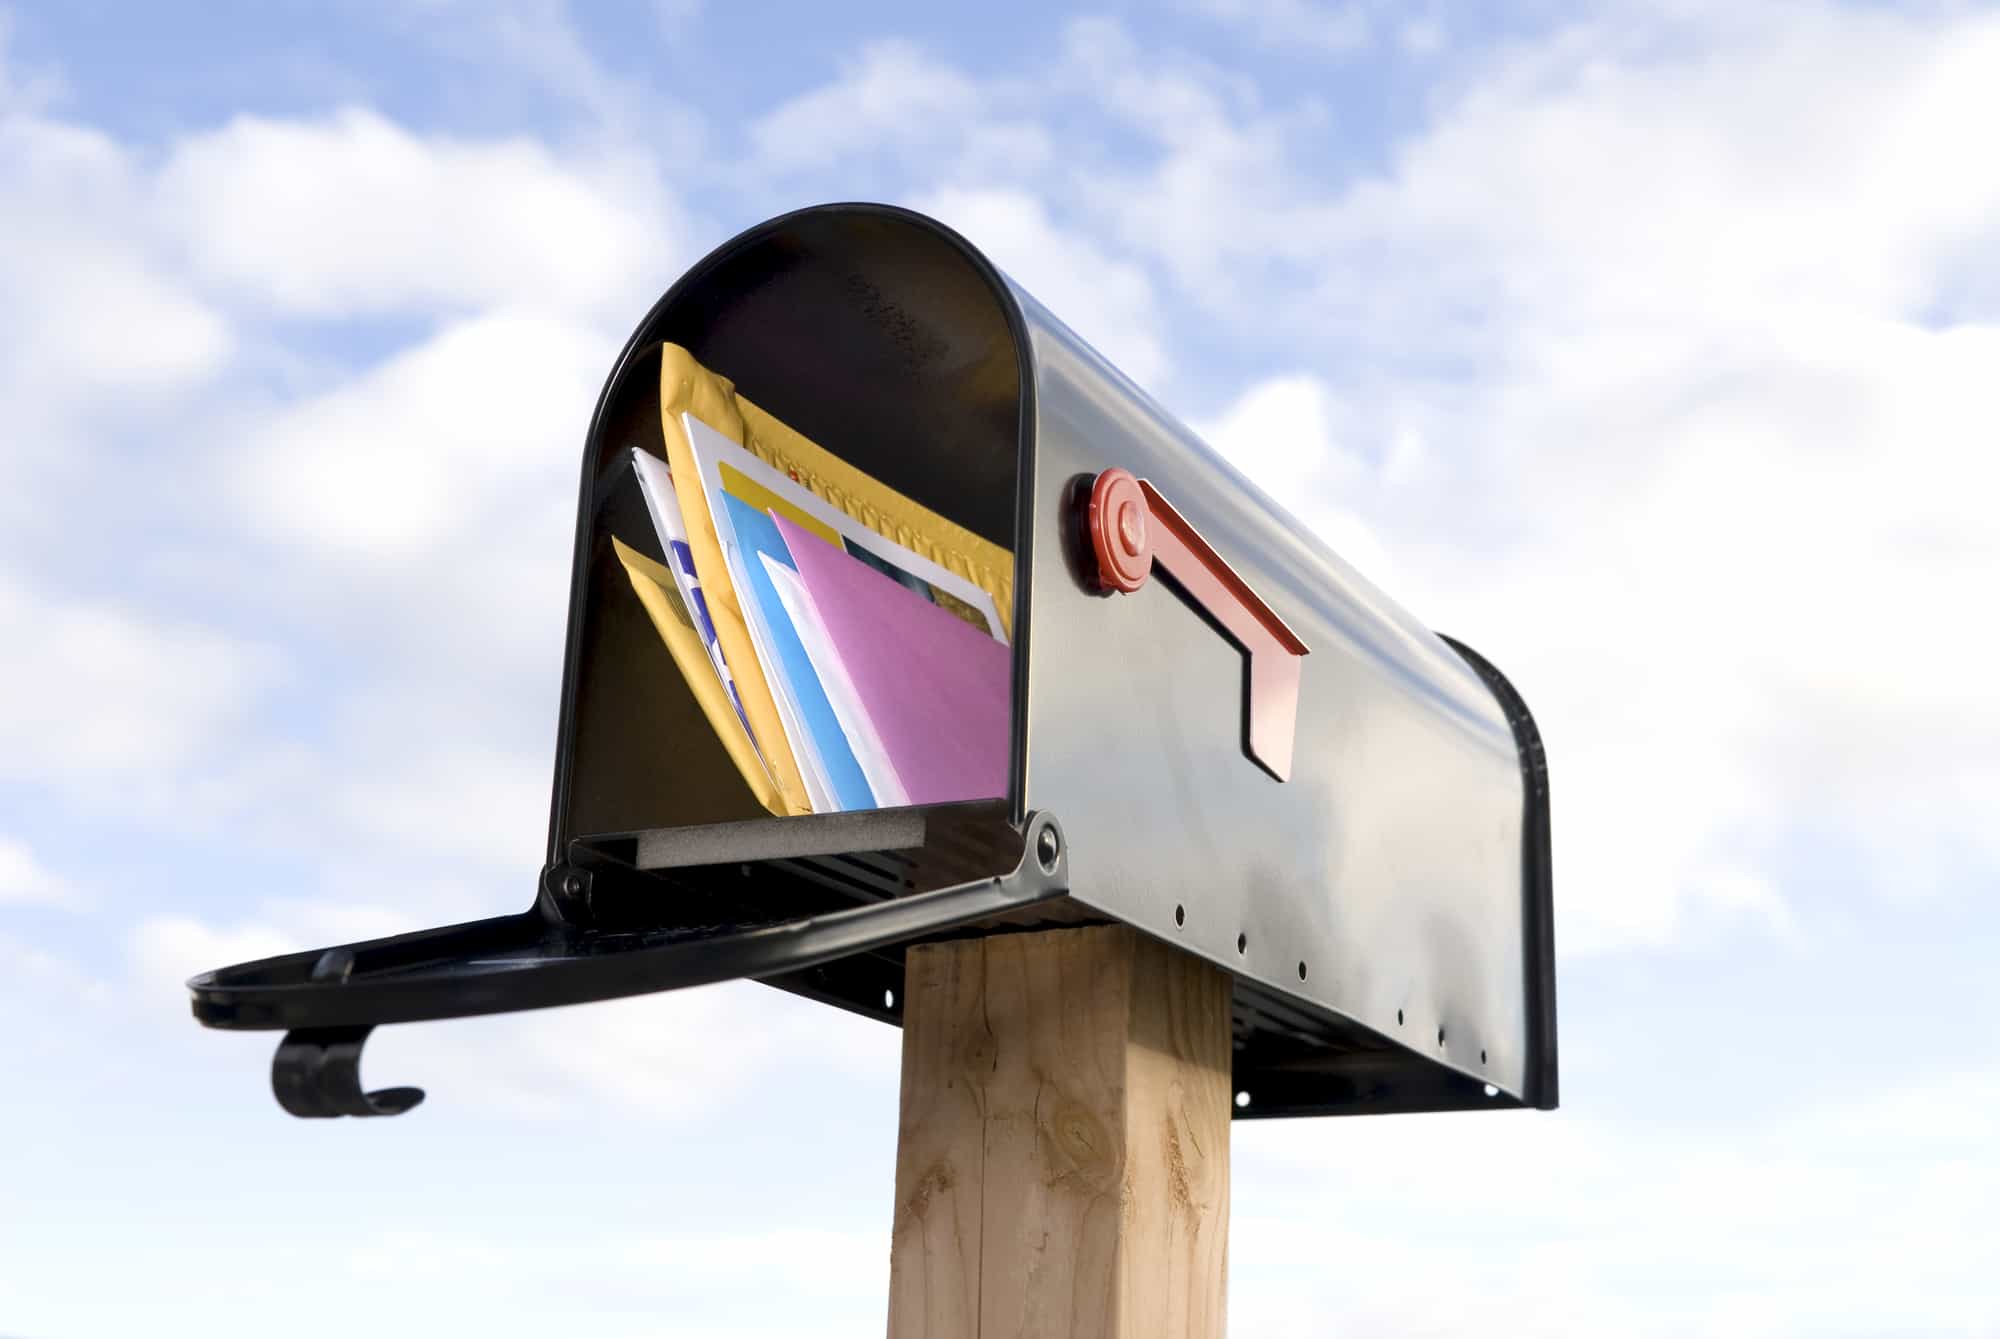 mail and envelopes in mailbox against sky